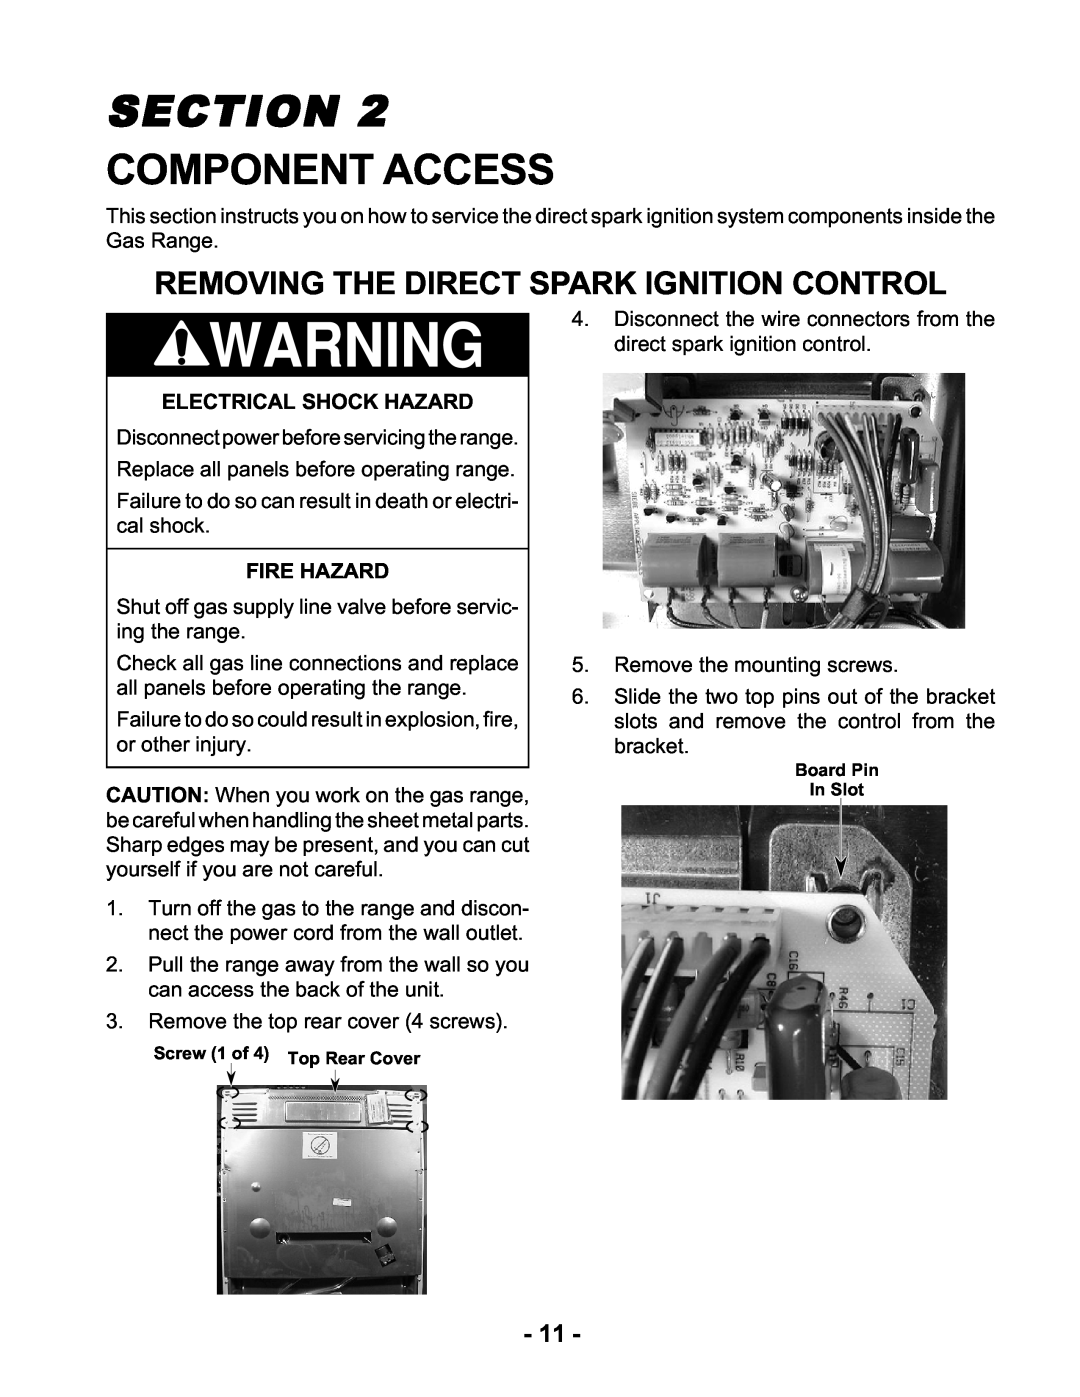 Whirlpool KR-28 manual Component Access, Removing The Direct Spark Ignition Control, Electrical Shock Hazard, Fire Hazard 